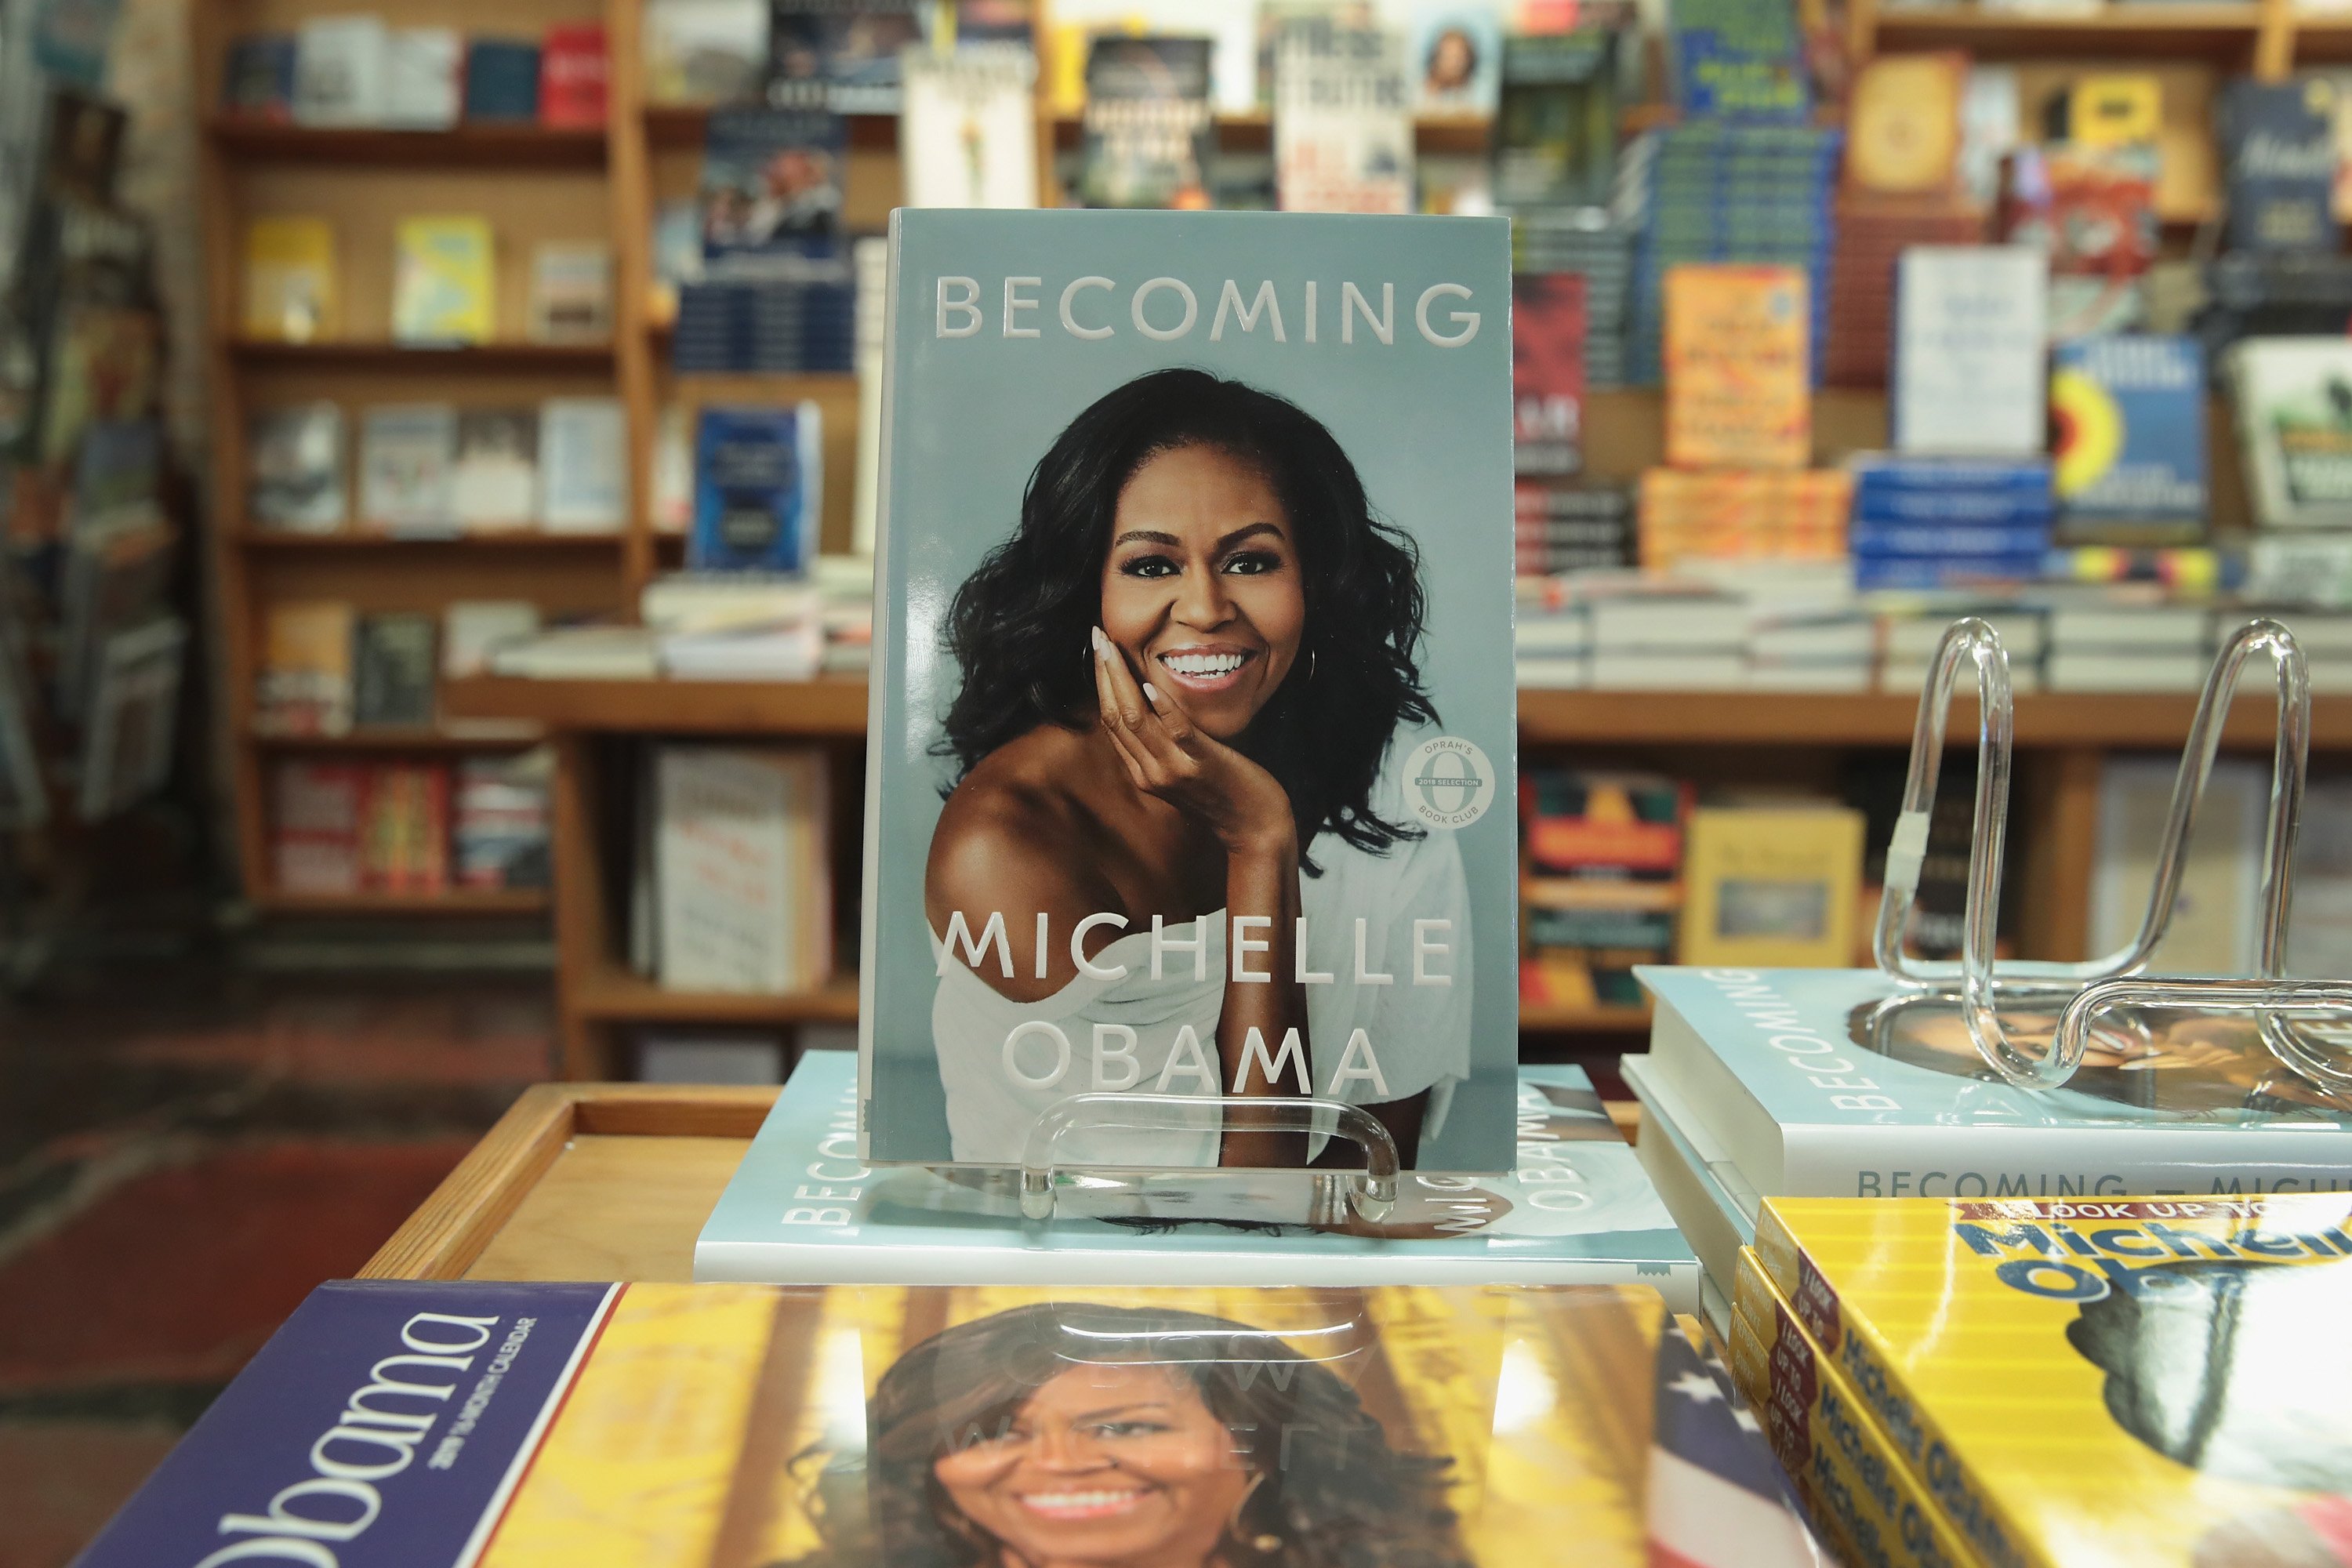 " Becoming", a book by former first lady Michelle Obama, is displayed at the 57th Street Books bookstore on November 13, 2018, in Chicago, Illinois. | Source: Getty Images.